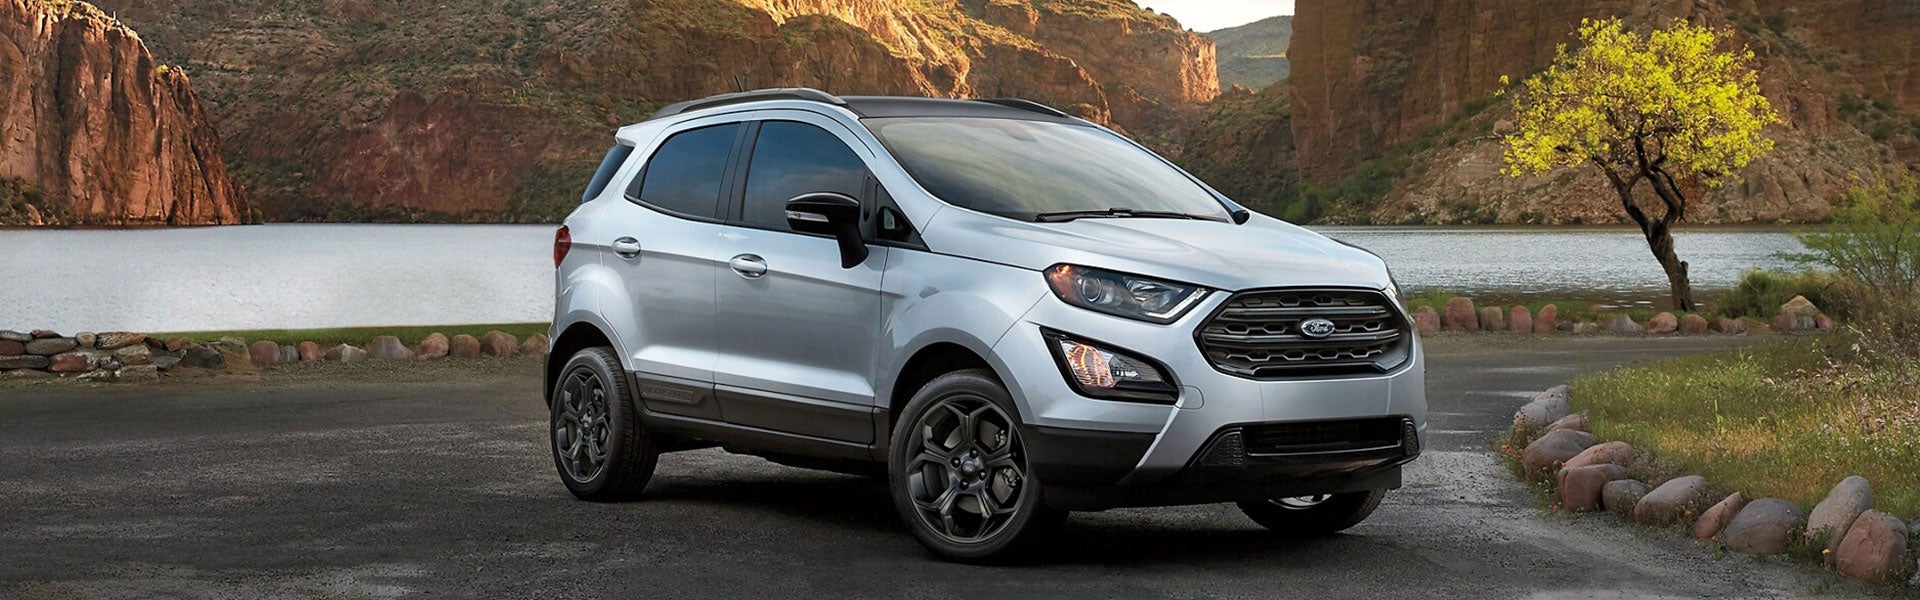 2021 Ford Eco-Sport